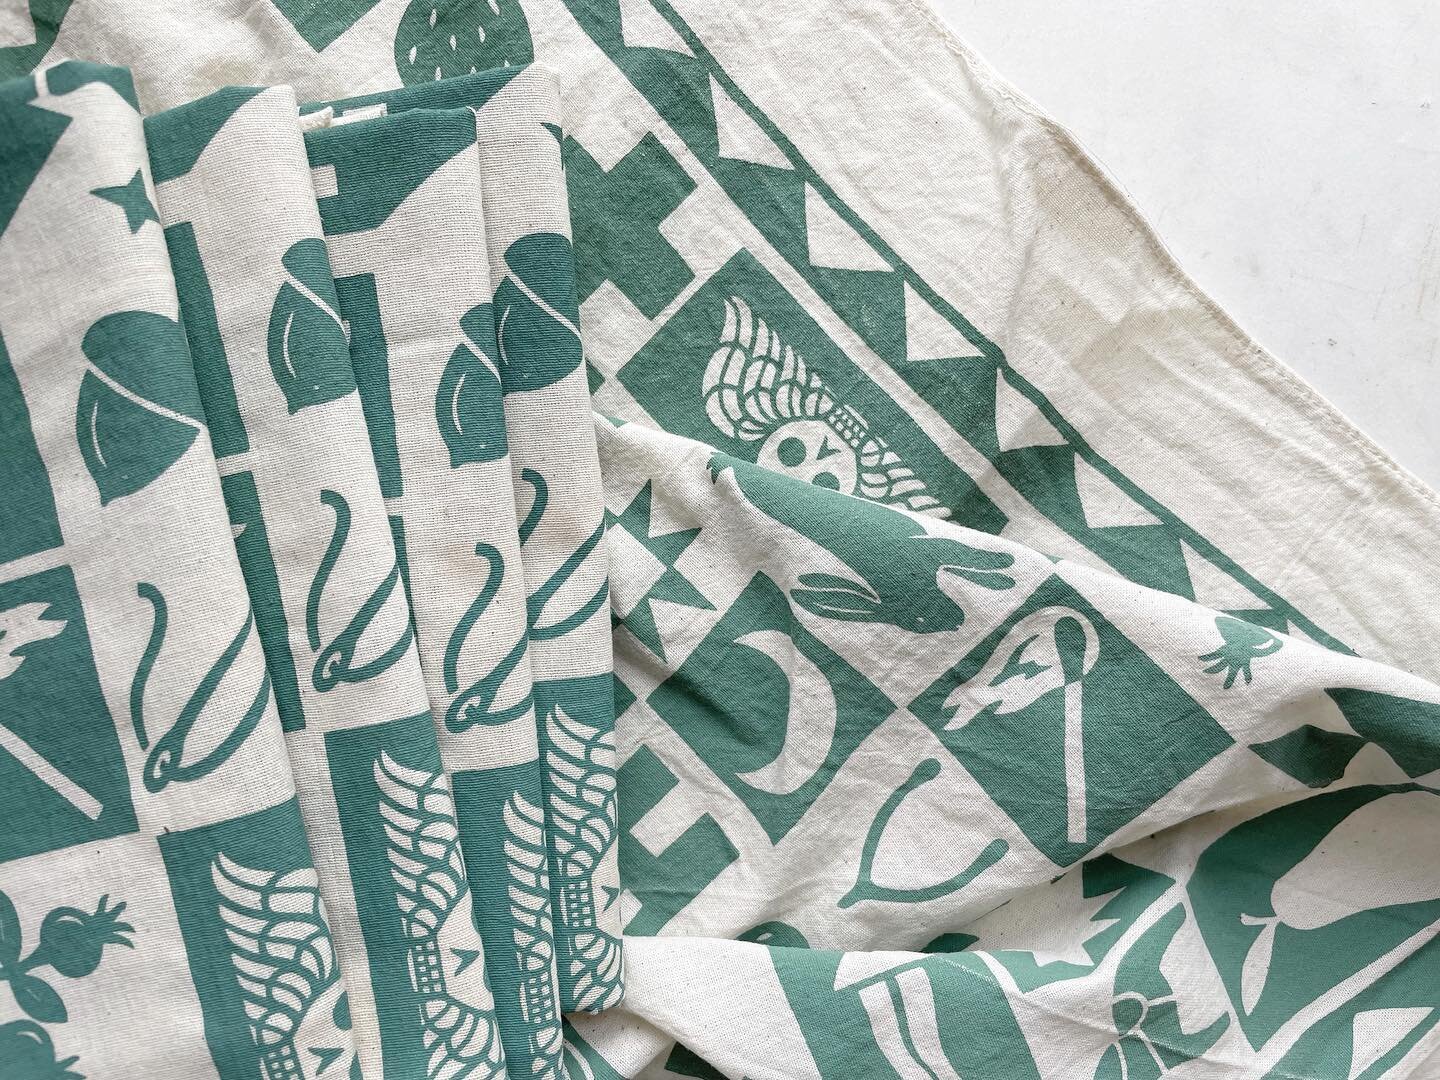 Quilt bandanas are back! These cuties are limited edition so don&rsquo;t wait too long. I have to say, this sage green is giving me life right now. Can you tell I&rsquo;ve been longing for spring?